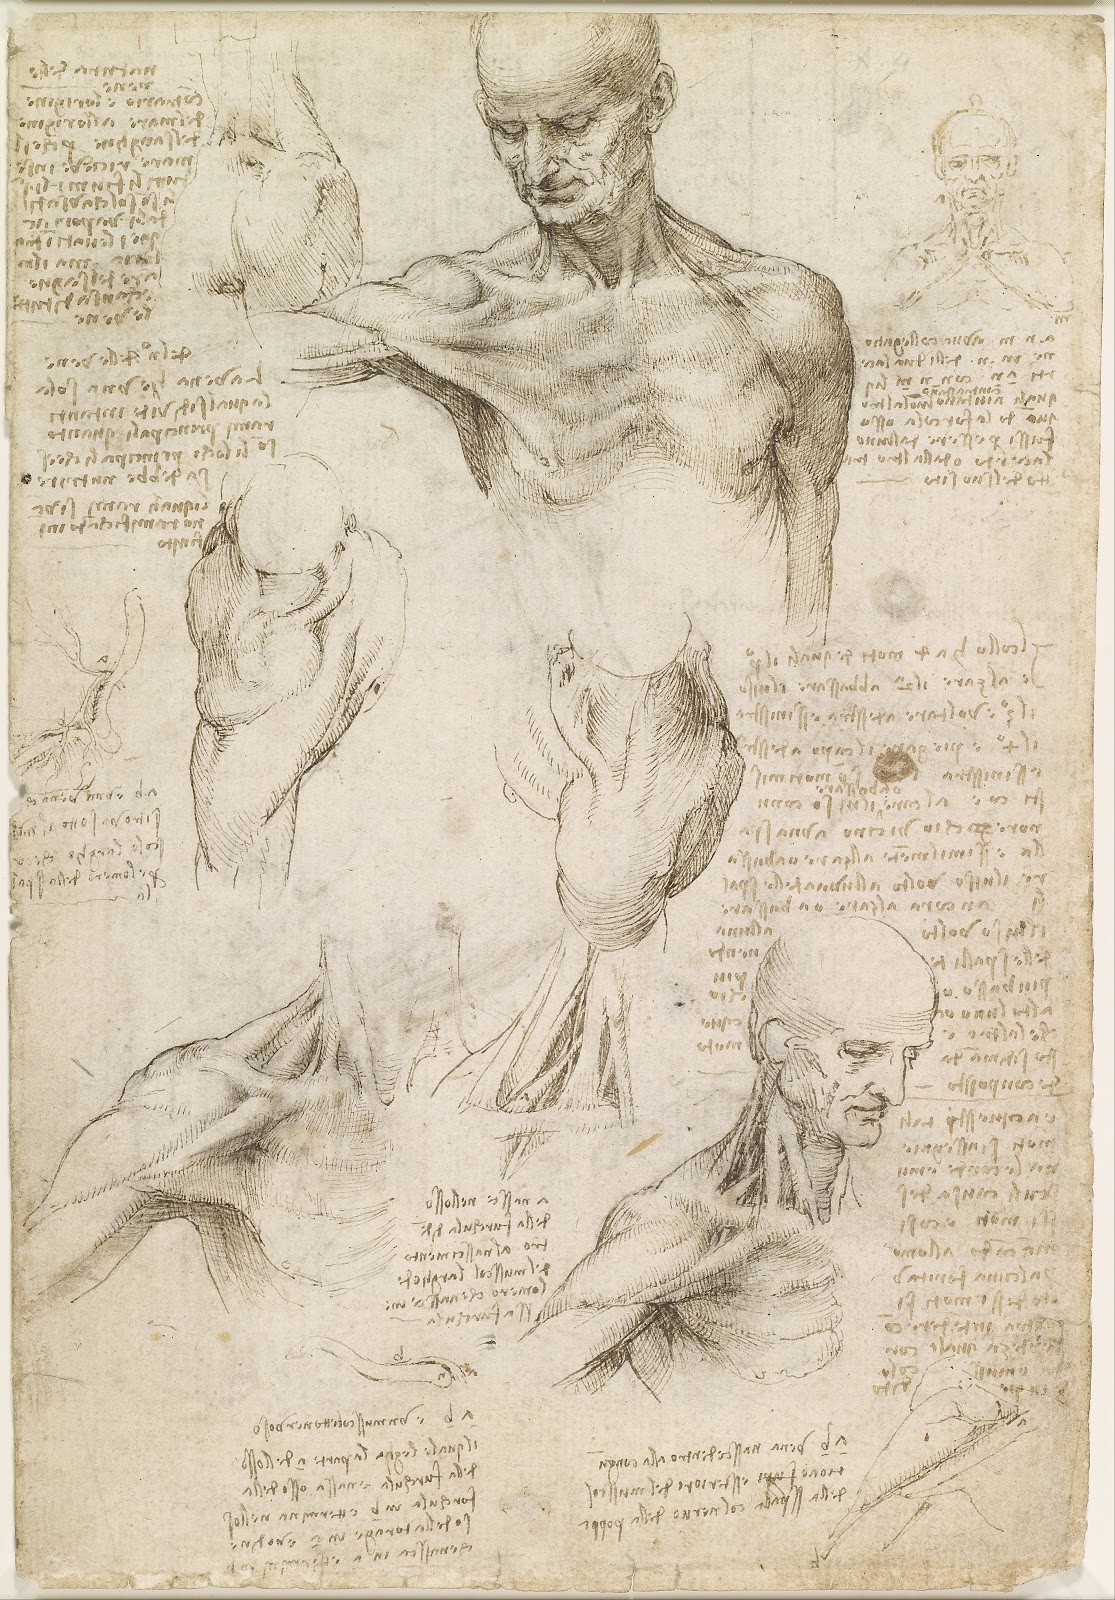 One of Da Vinci's anatomical drawings, a realistic depiction of musculature.